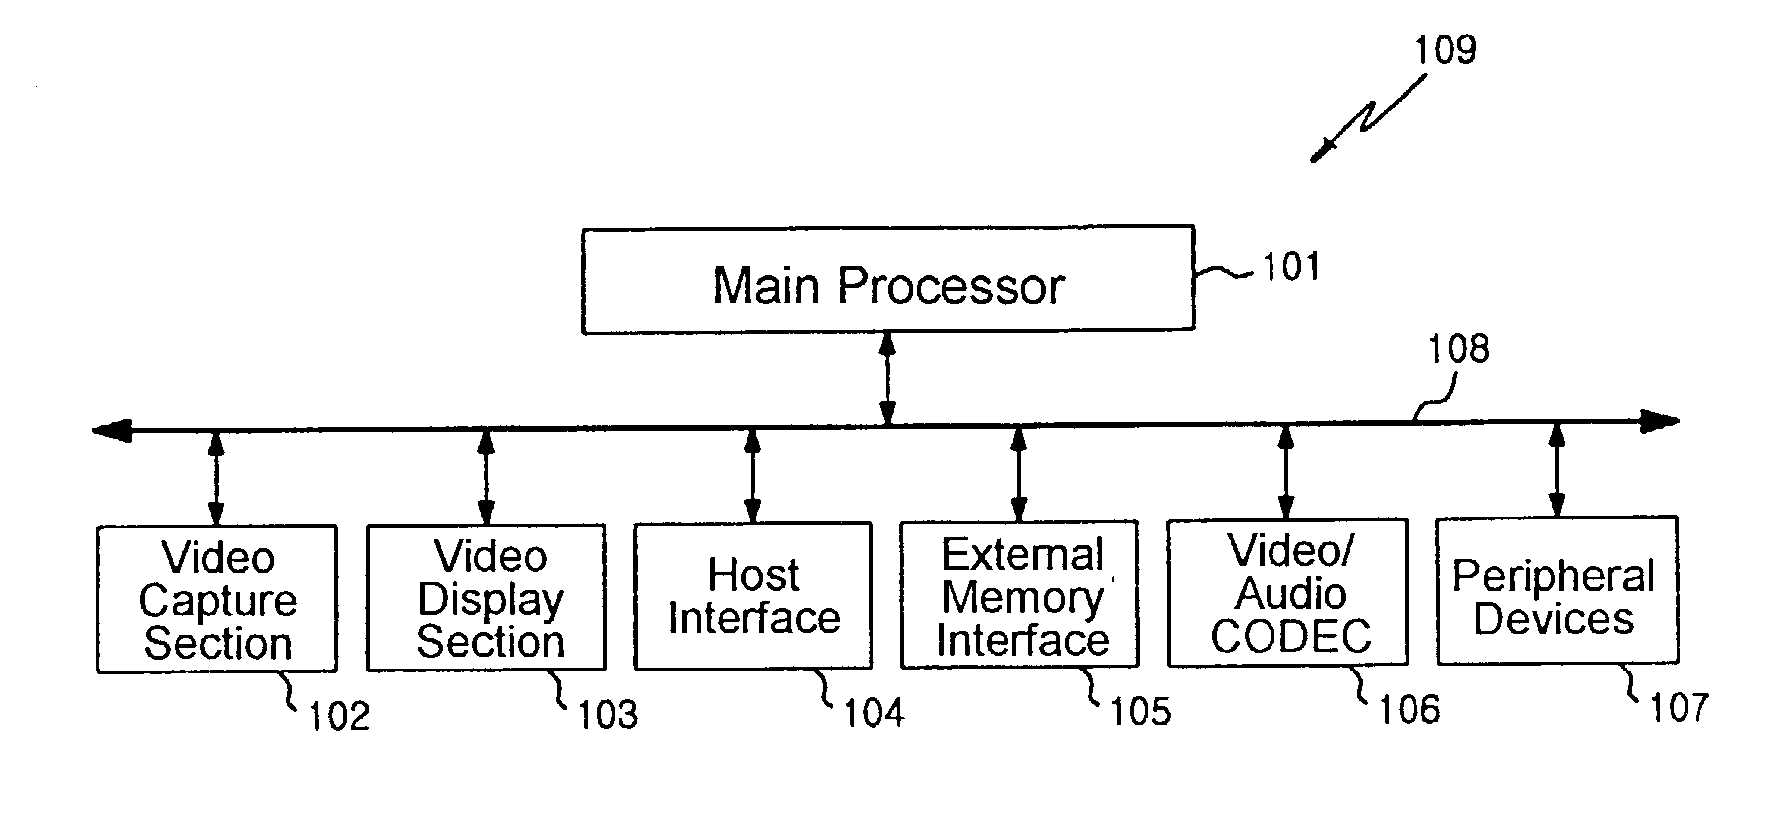 Moving picture decoding processor for multimedia signal processing